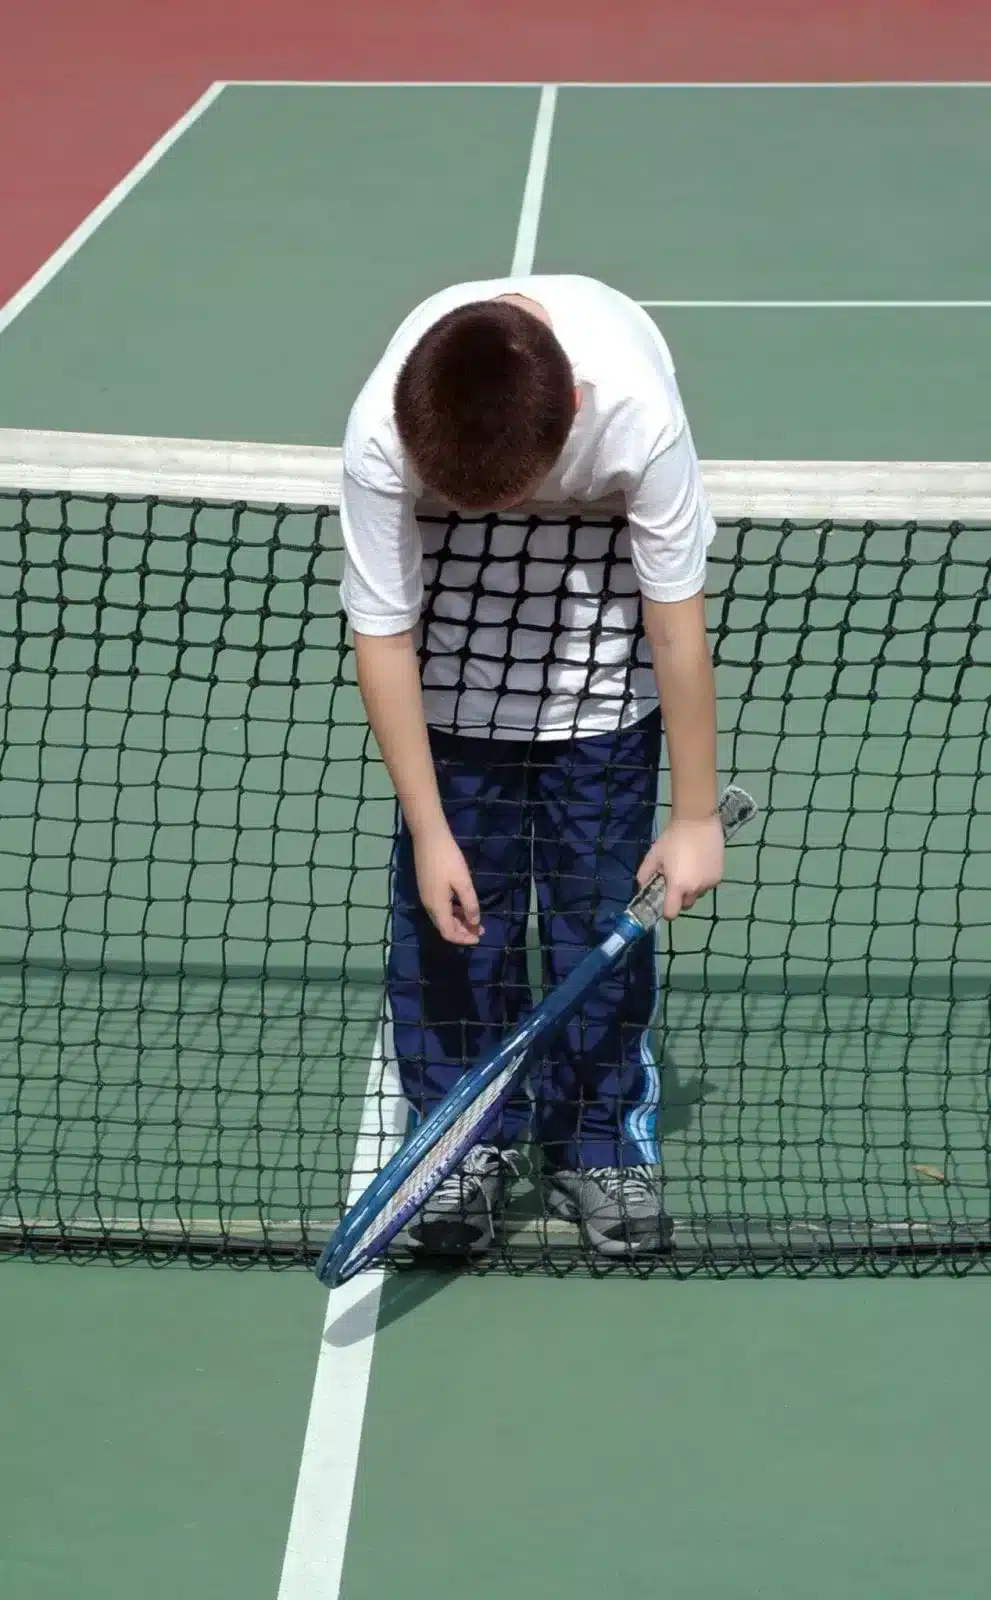 Boy hunched over tennis net